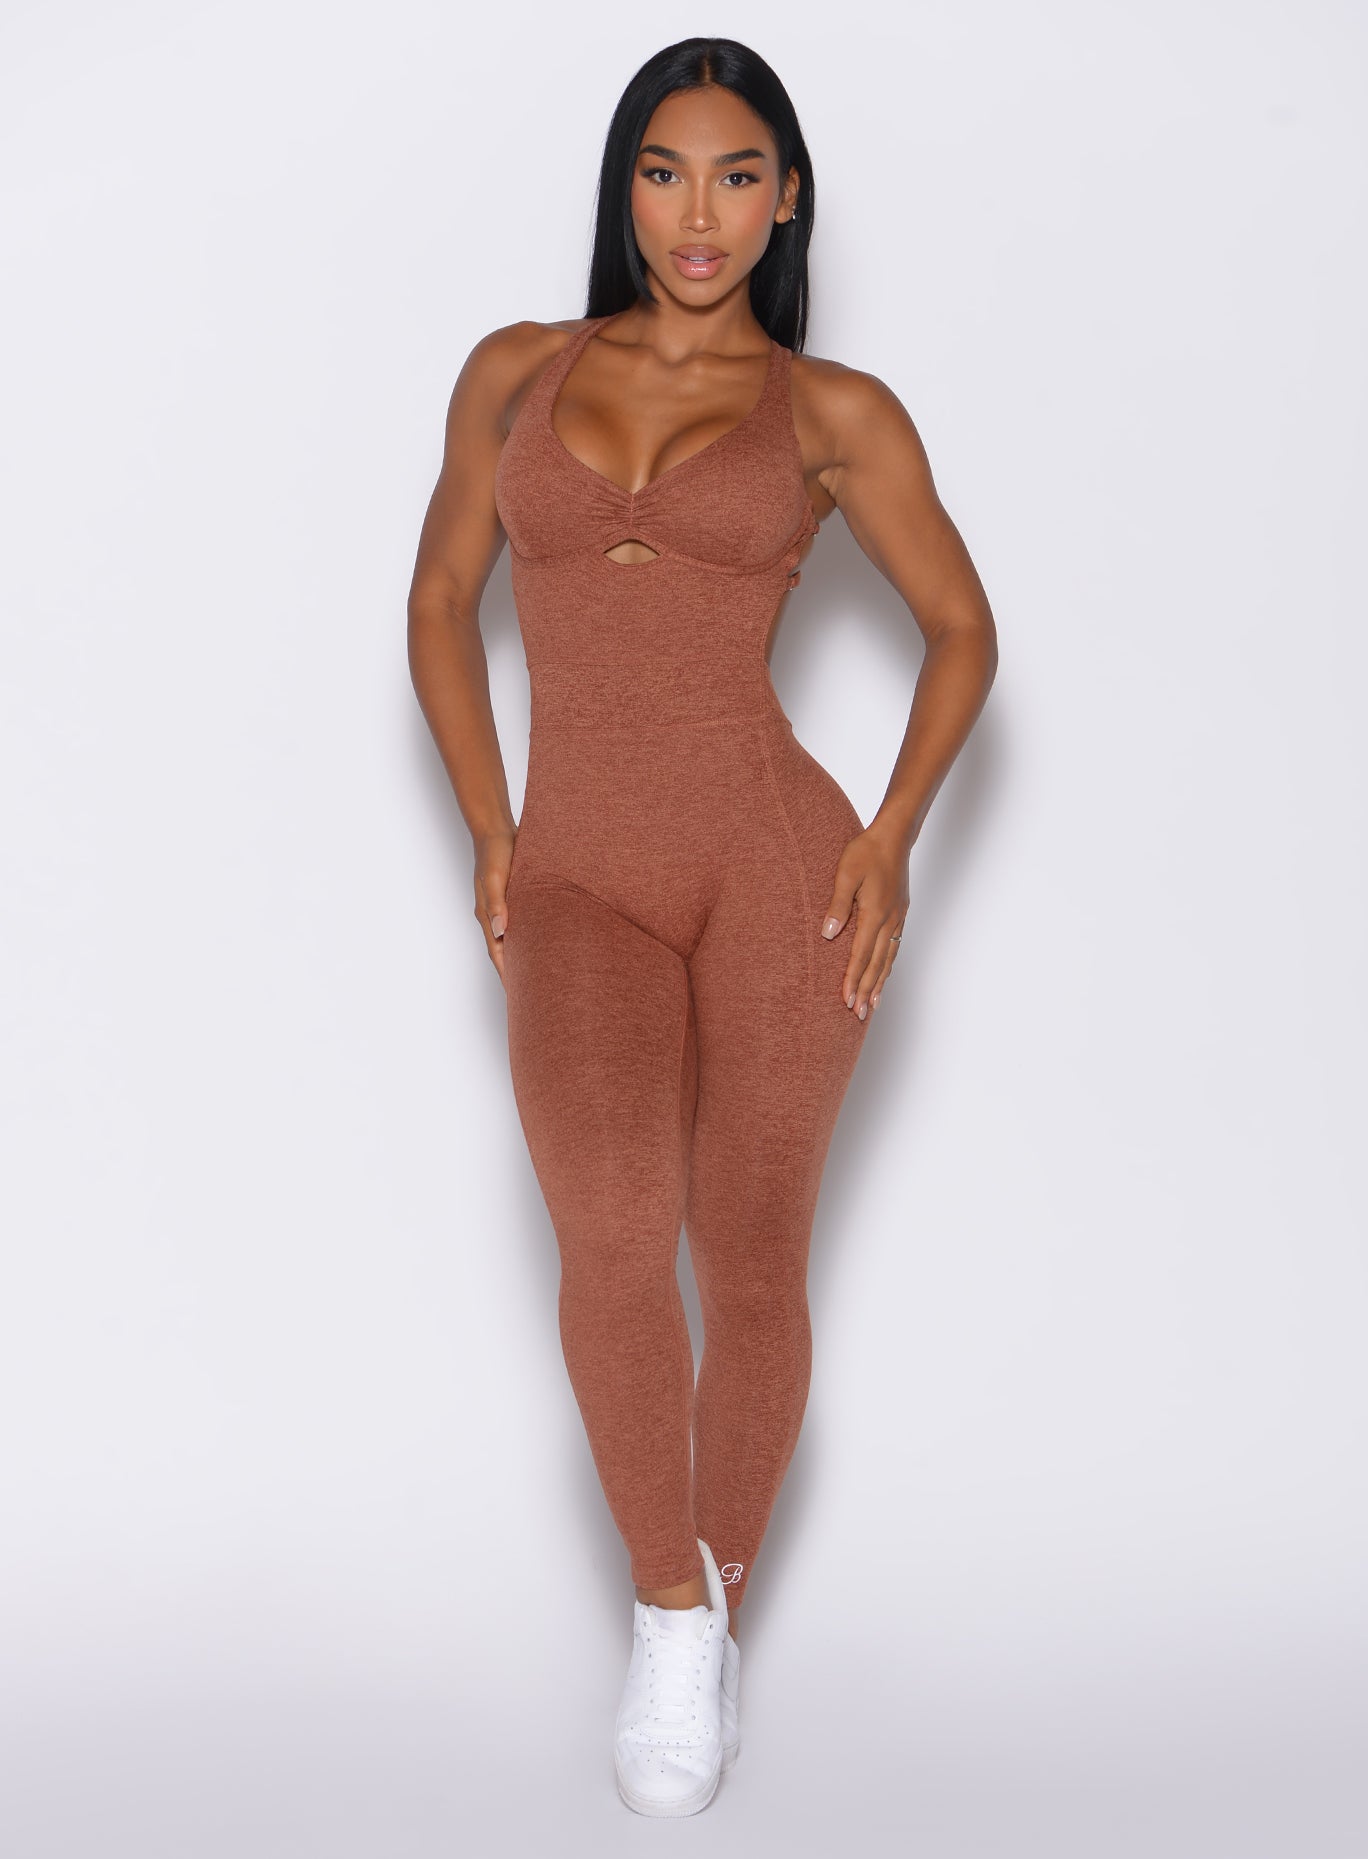 Front profile view of a model facing forward wearing our bombshell bodysuit in spiced chai color